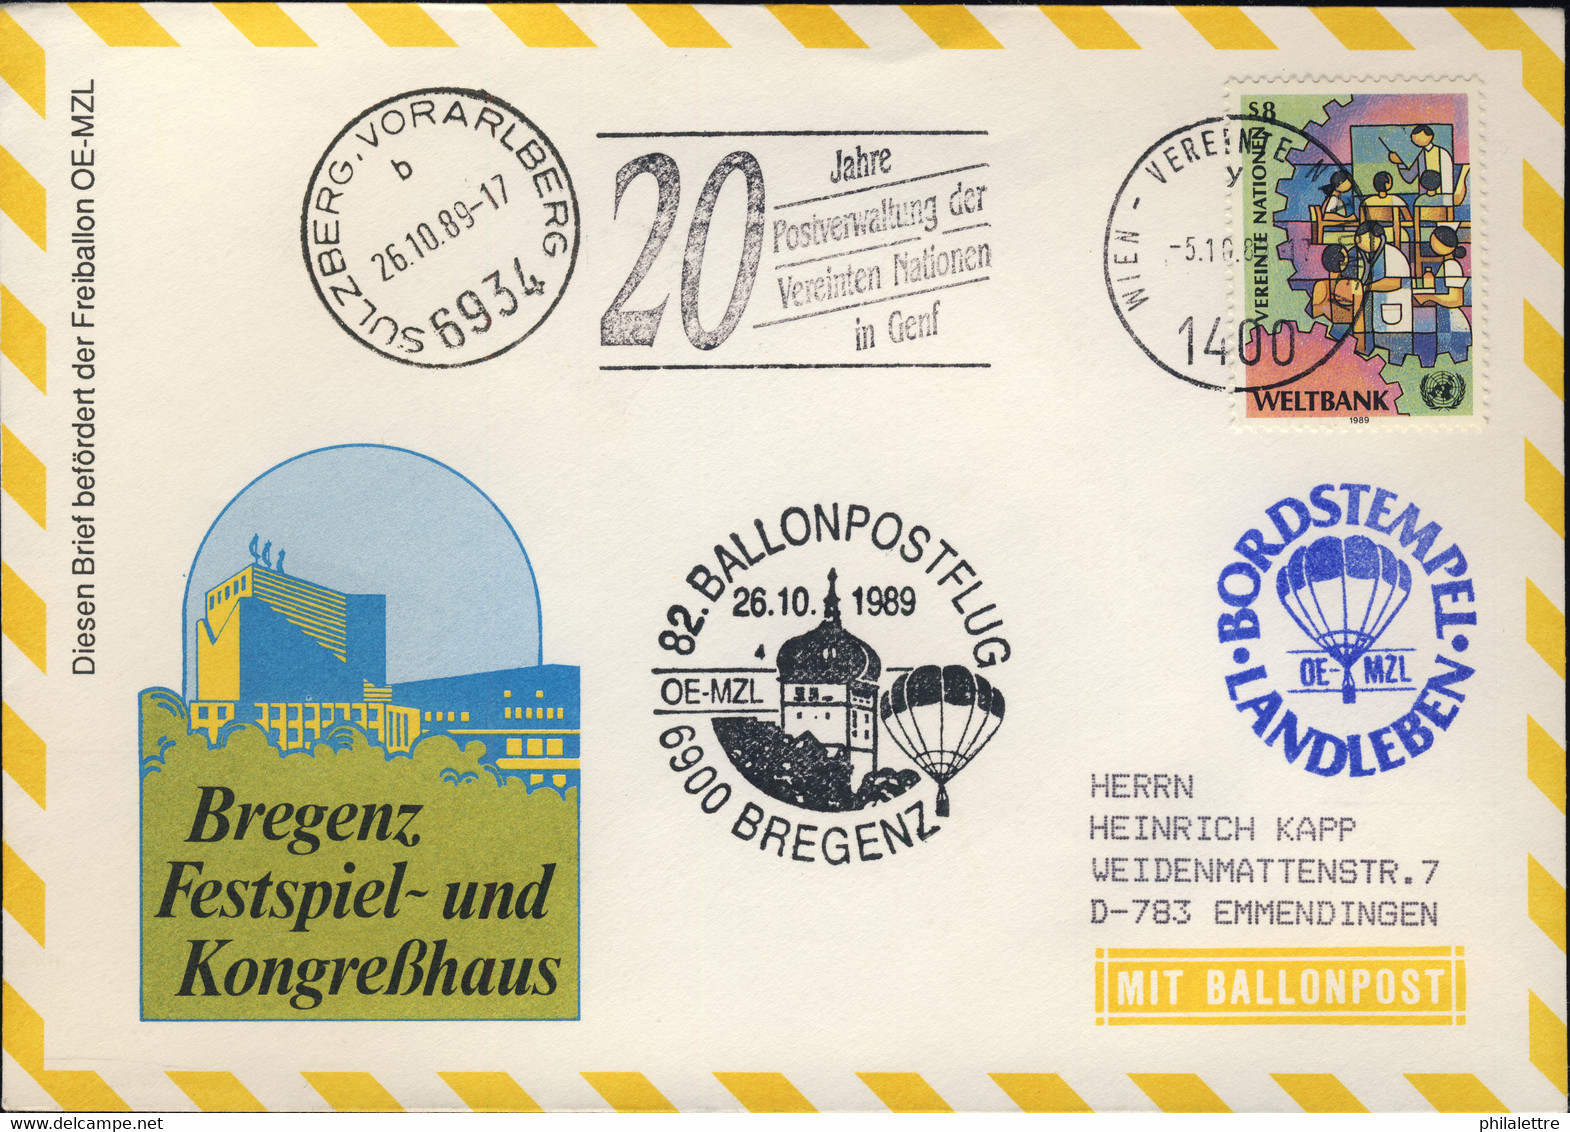 AUTRICHE / AUSTRIA / United Nations VIENNA 1989 82nd Balloon Post Flight Cover - Balloon Covers